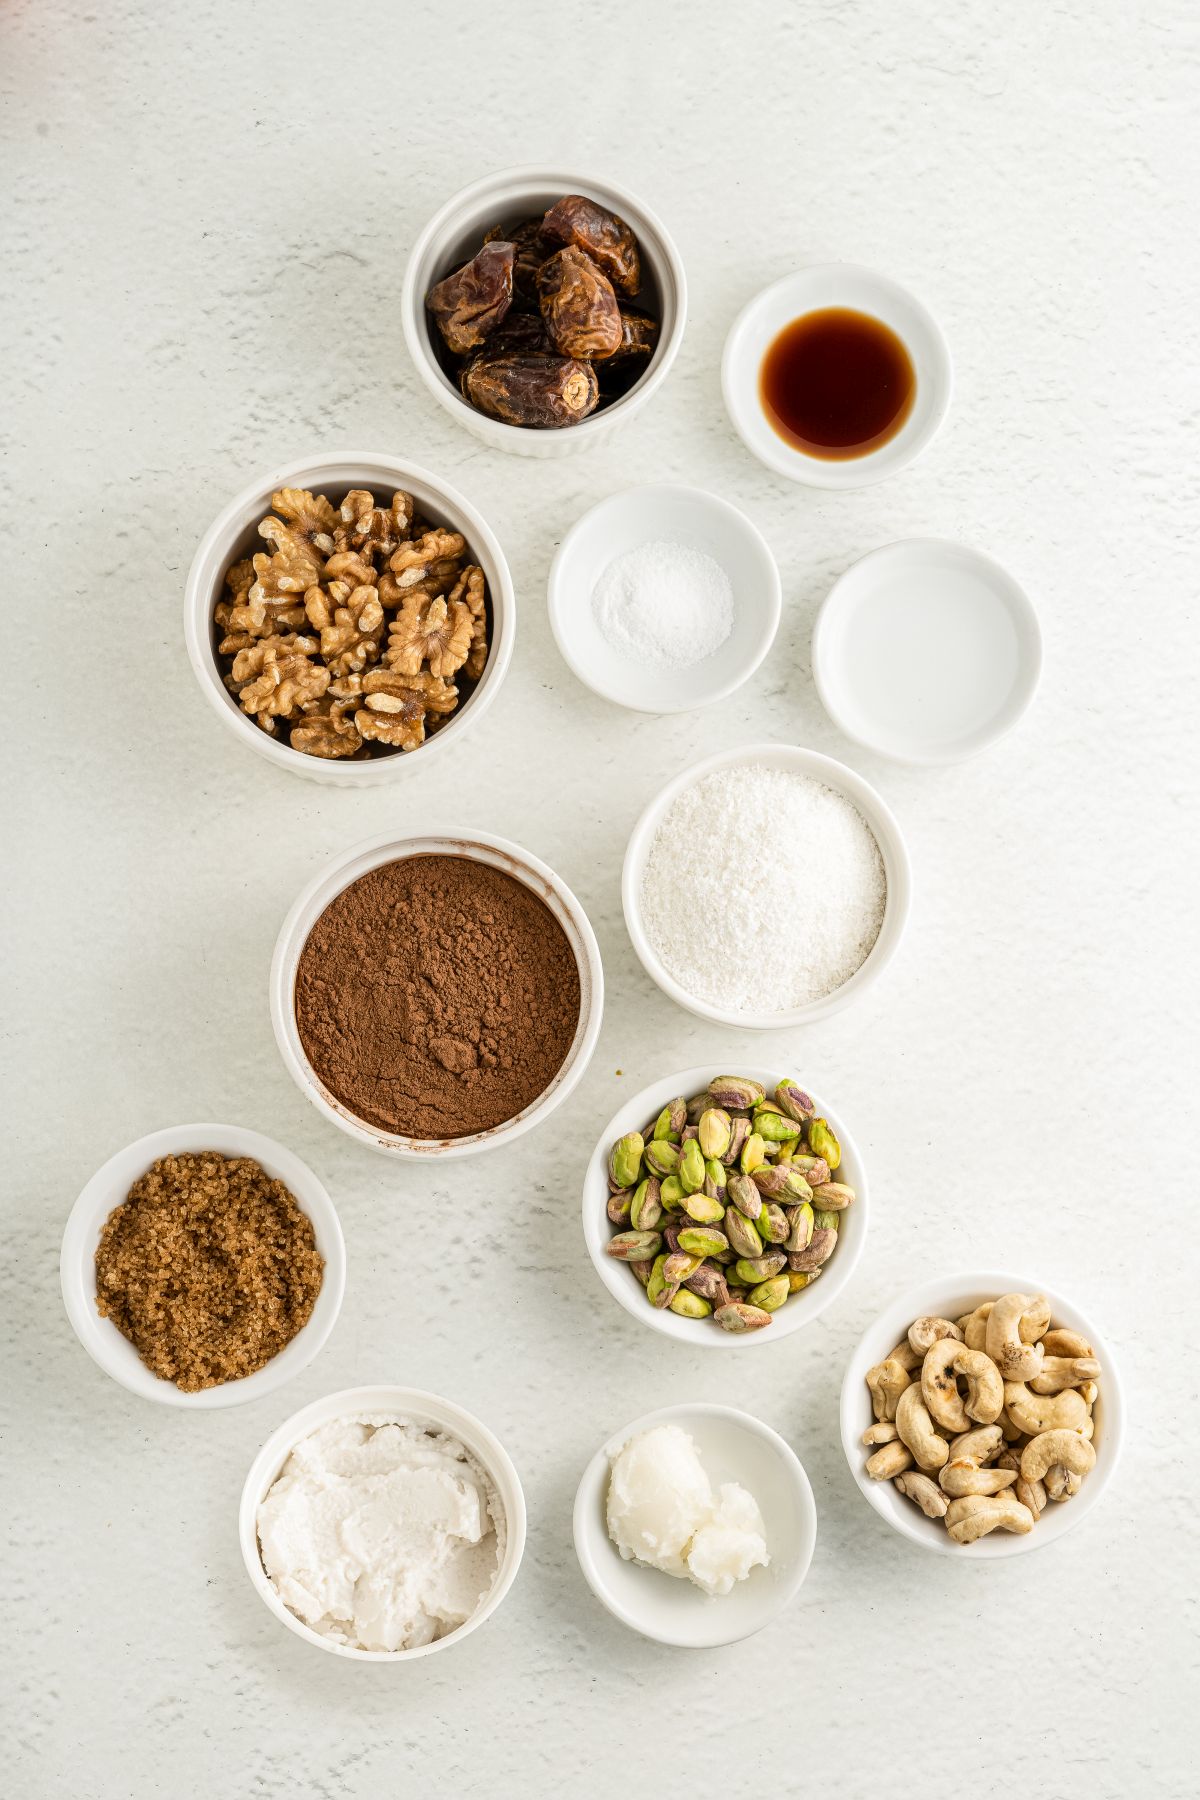 No-bake Chocolate and Pistachio Slices ingredients